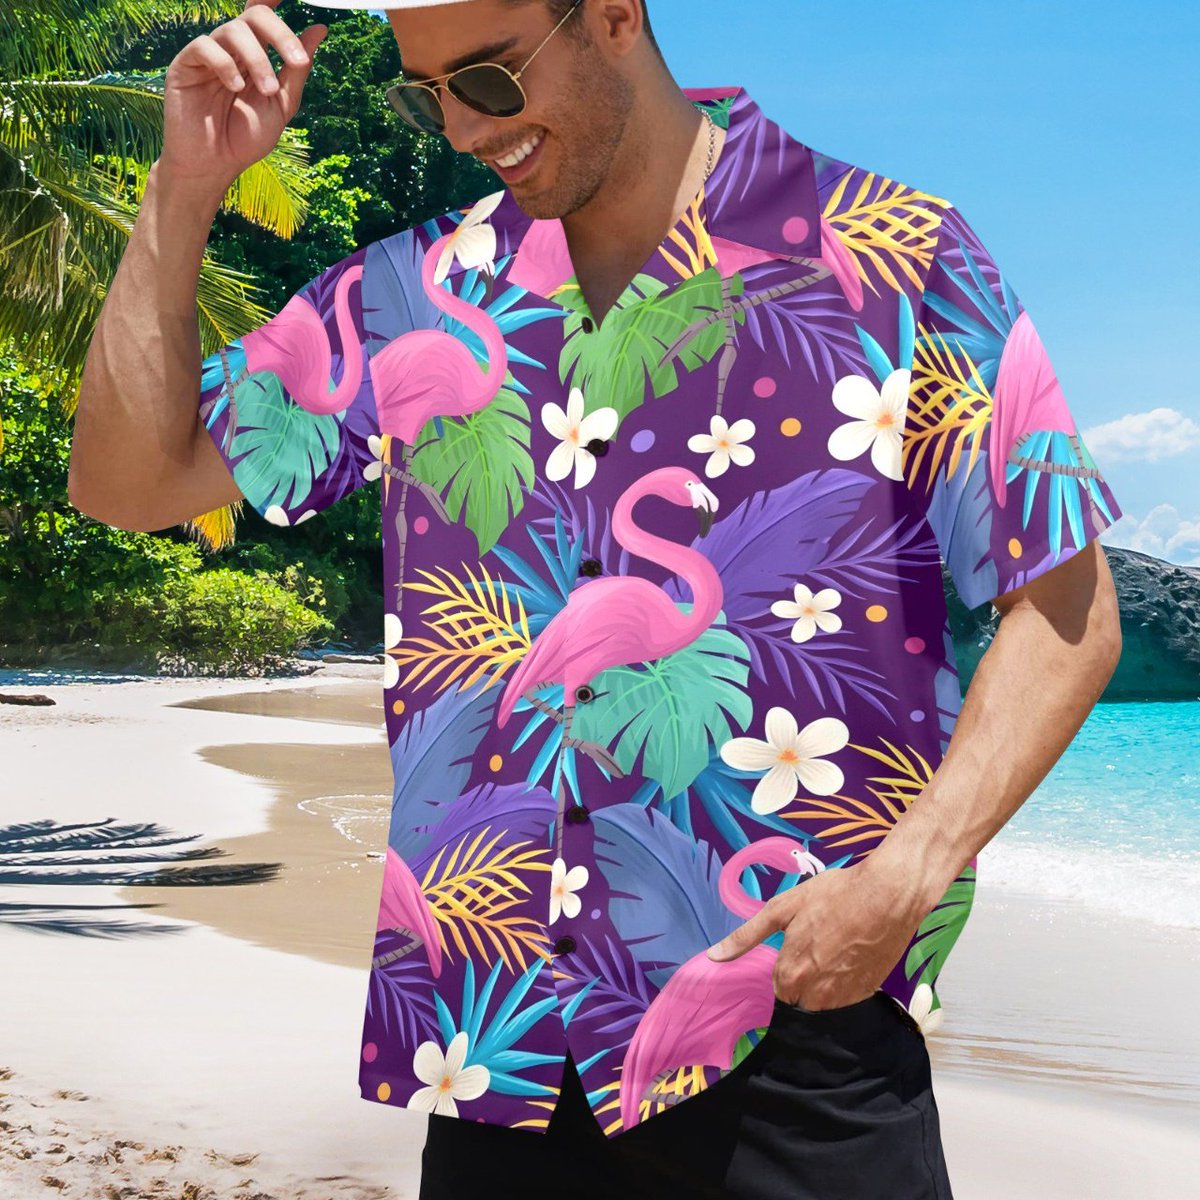 New on our site and at Walmart. 25 different designs. Thanks for looking, liking, sharing and caring about #smallbiz i.mtr.cool/gemnhwpbsb 
#fathersdaygifts #giftsfordad #DadGifts #fathersdayideas #giftideasfordad #beachwear #hawaiianshirt #beachvibes #alohalife #tropicalvibes